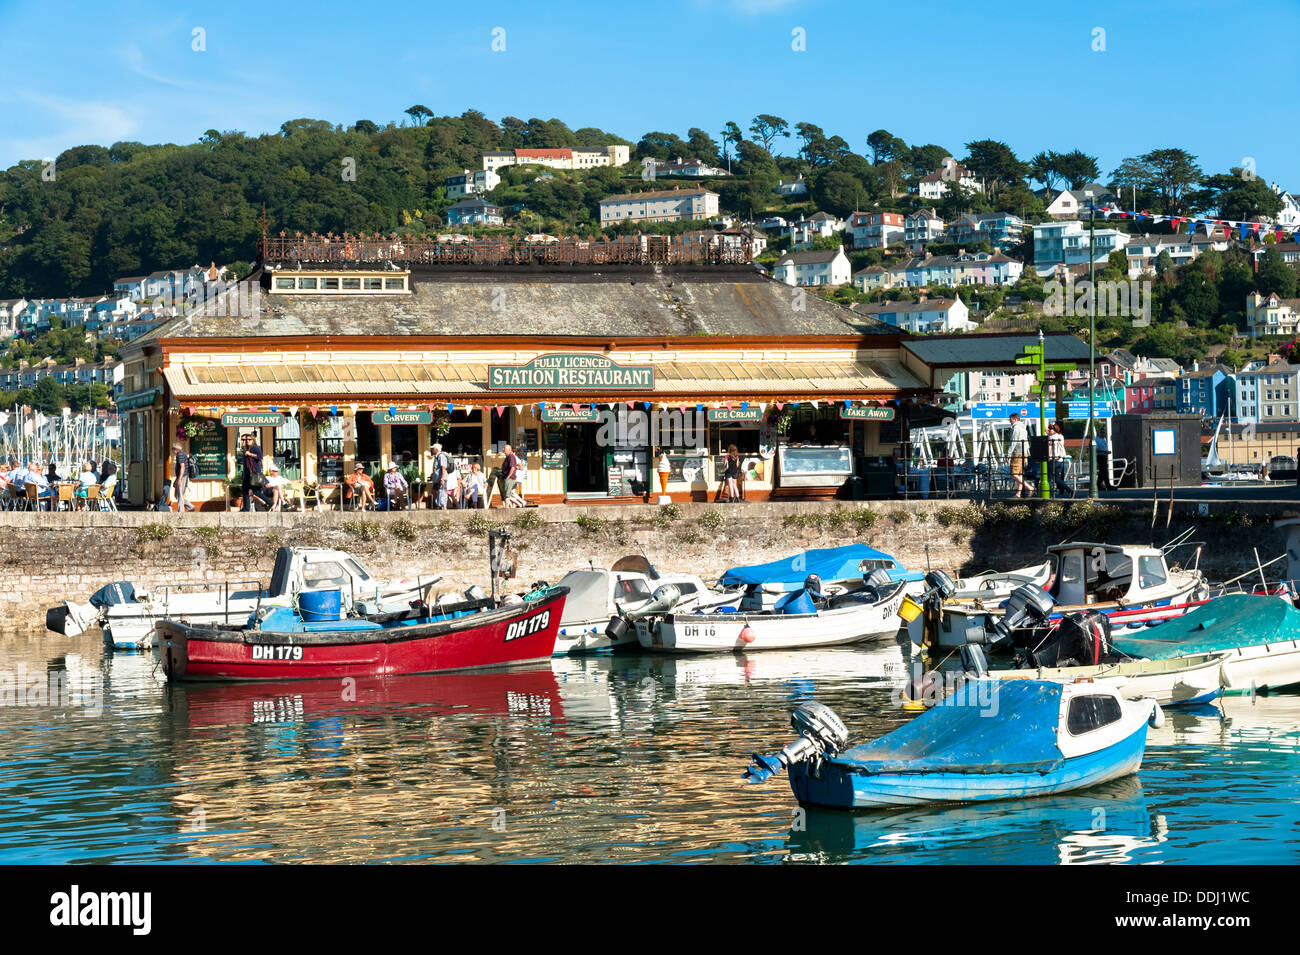 Boats in the Harbour & station restaurant at Dartmouth, Devon, UK. Stock Photo